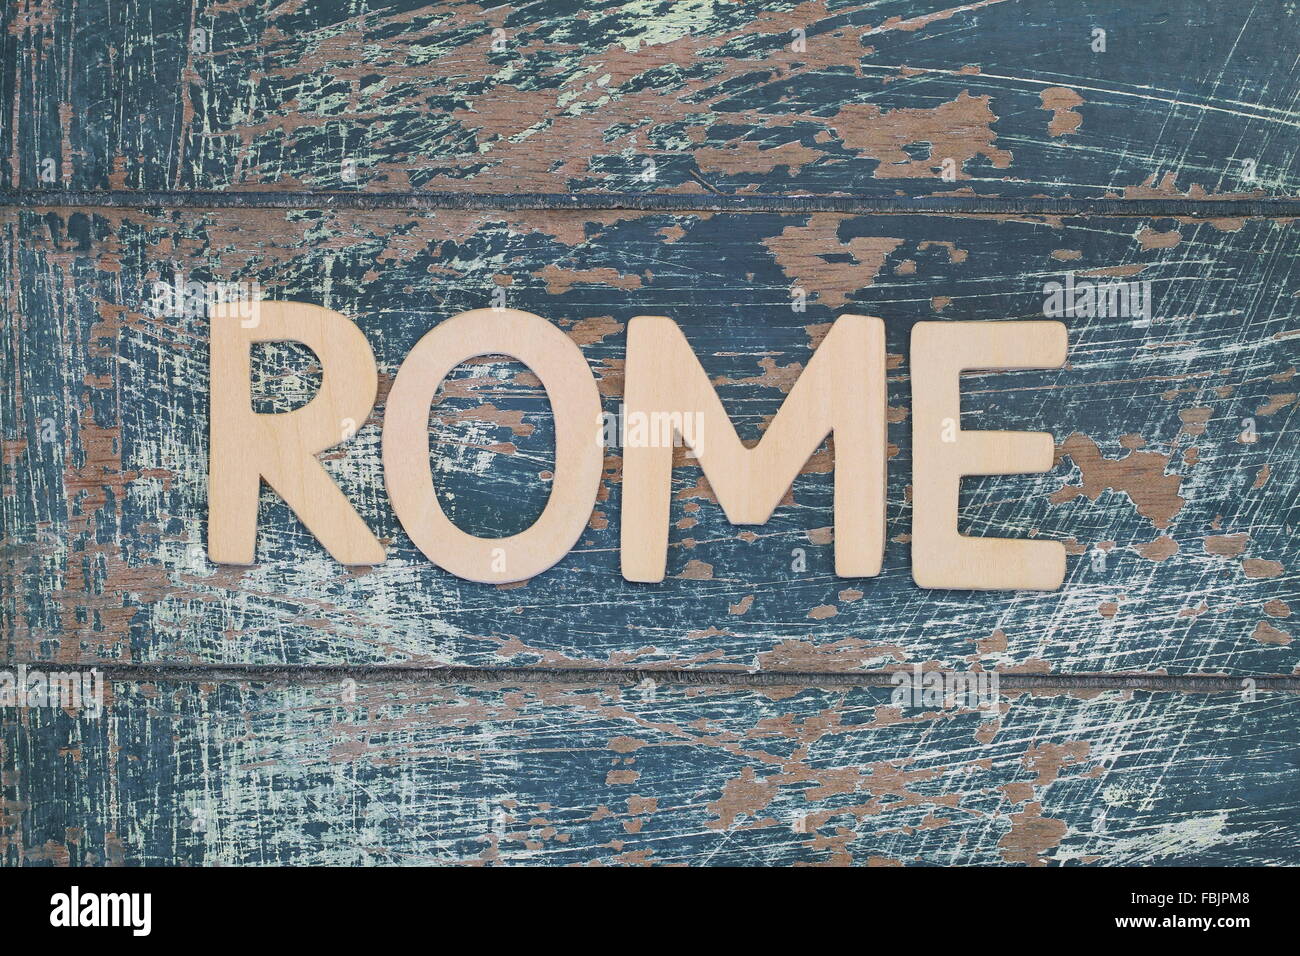 Rome written with wooden letters on rustic surface Stock Photo